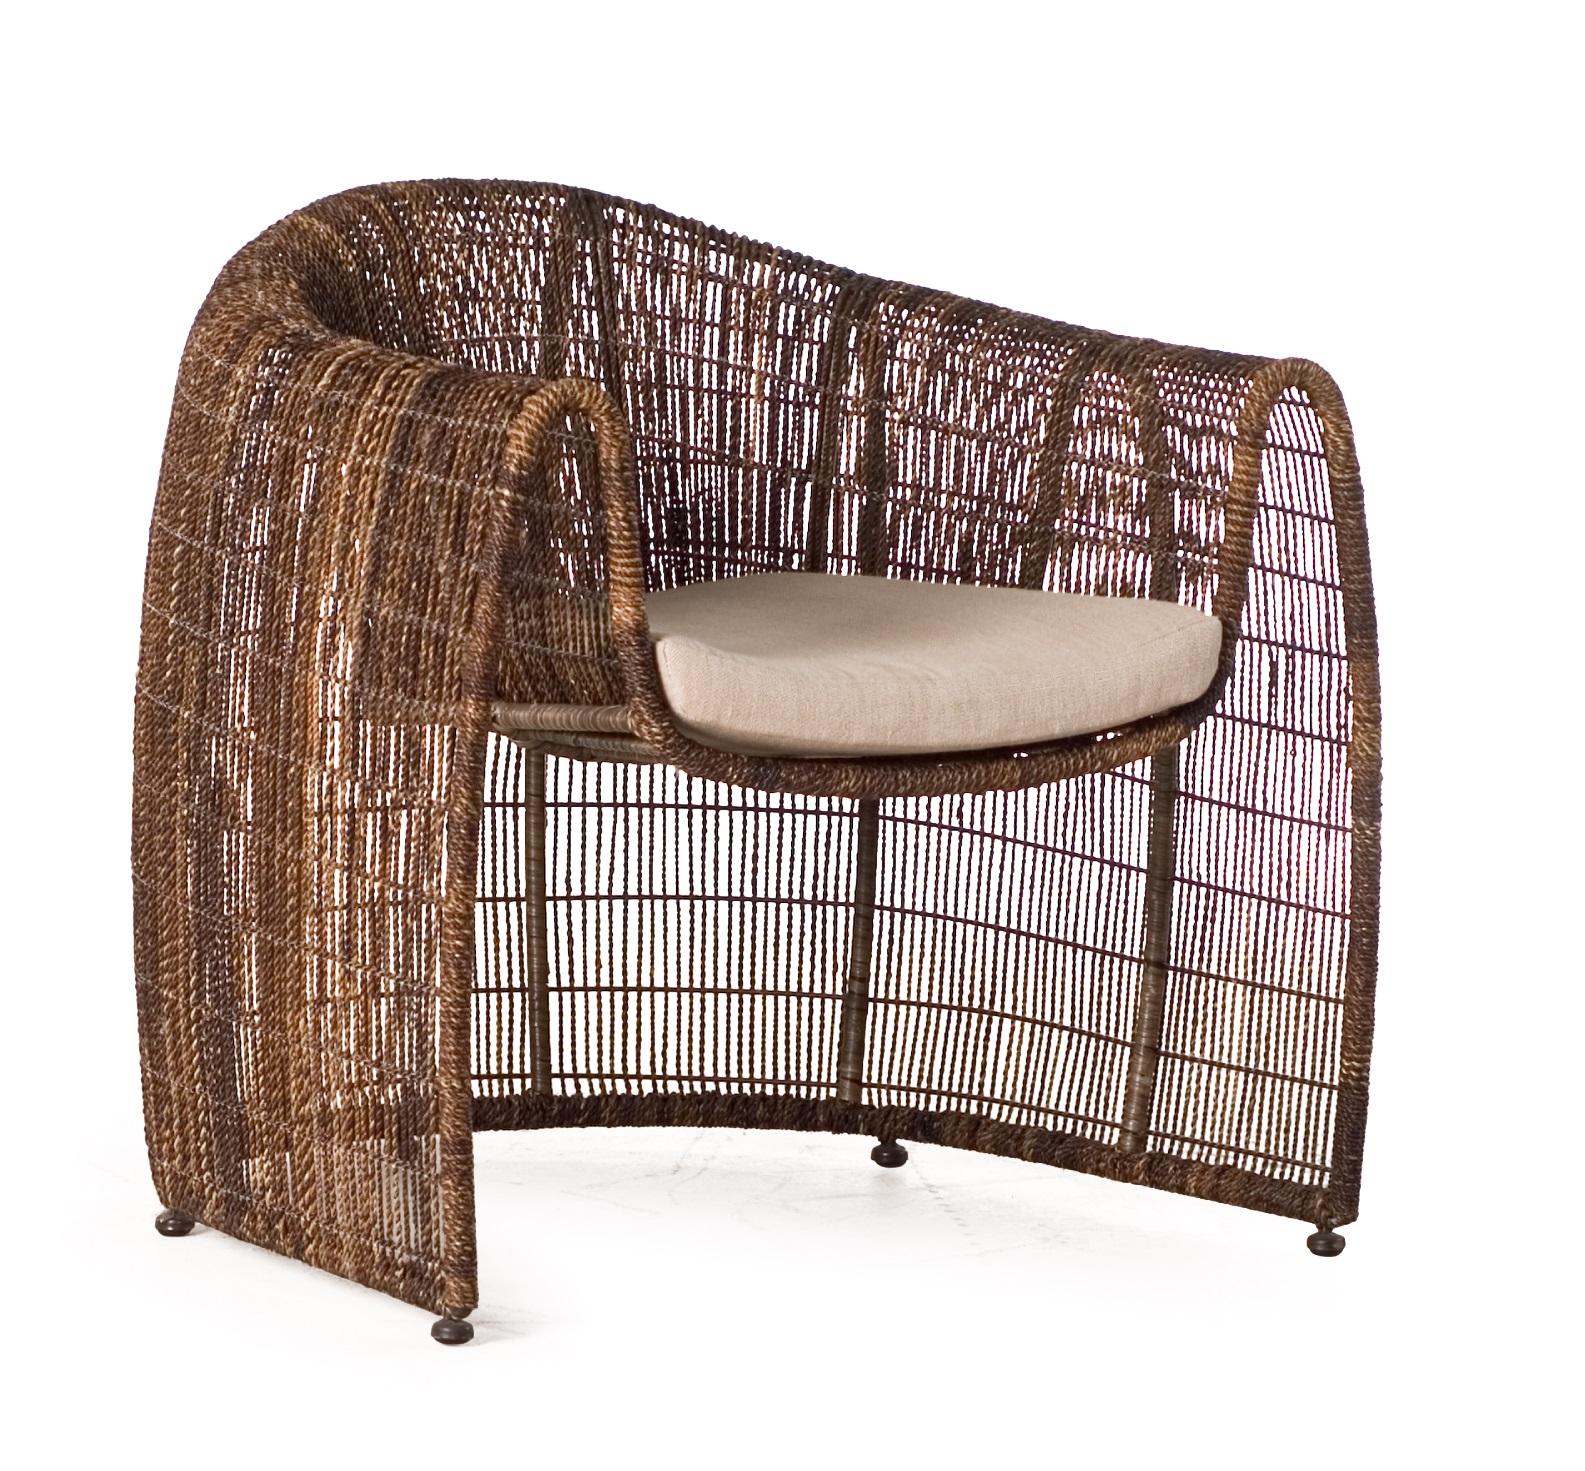 Indoor Lulu club chair by Kenneth Cobonpue
Materials: Abaca, nylon, steel. 
Also available in other colors and for outdoors. 
Dimensions: 78 cm x 84 cm x H 80.5 cm

Lulu adds grace to any space with its clean, nest-like silhouette. Its open